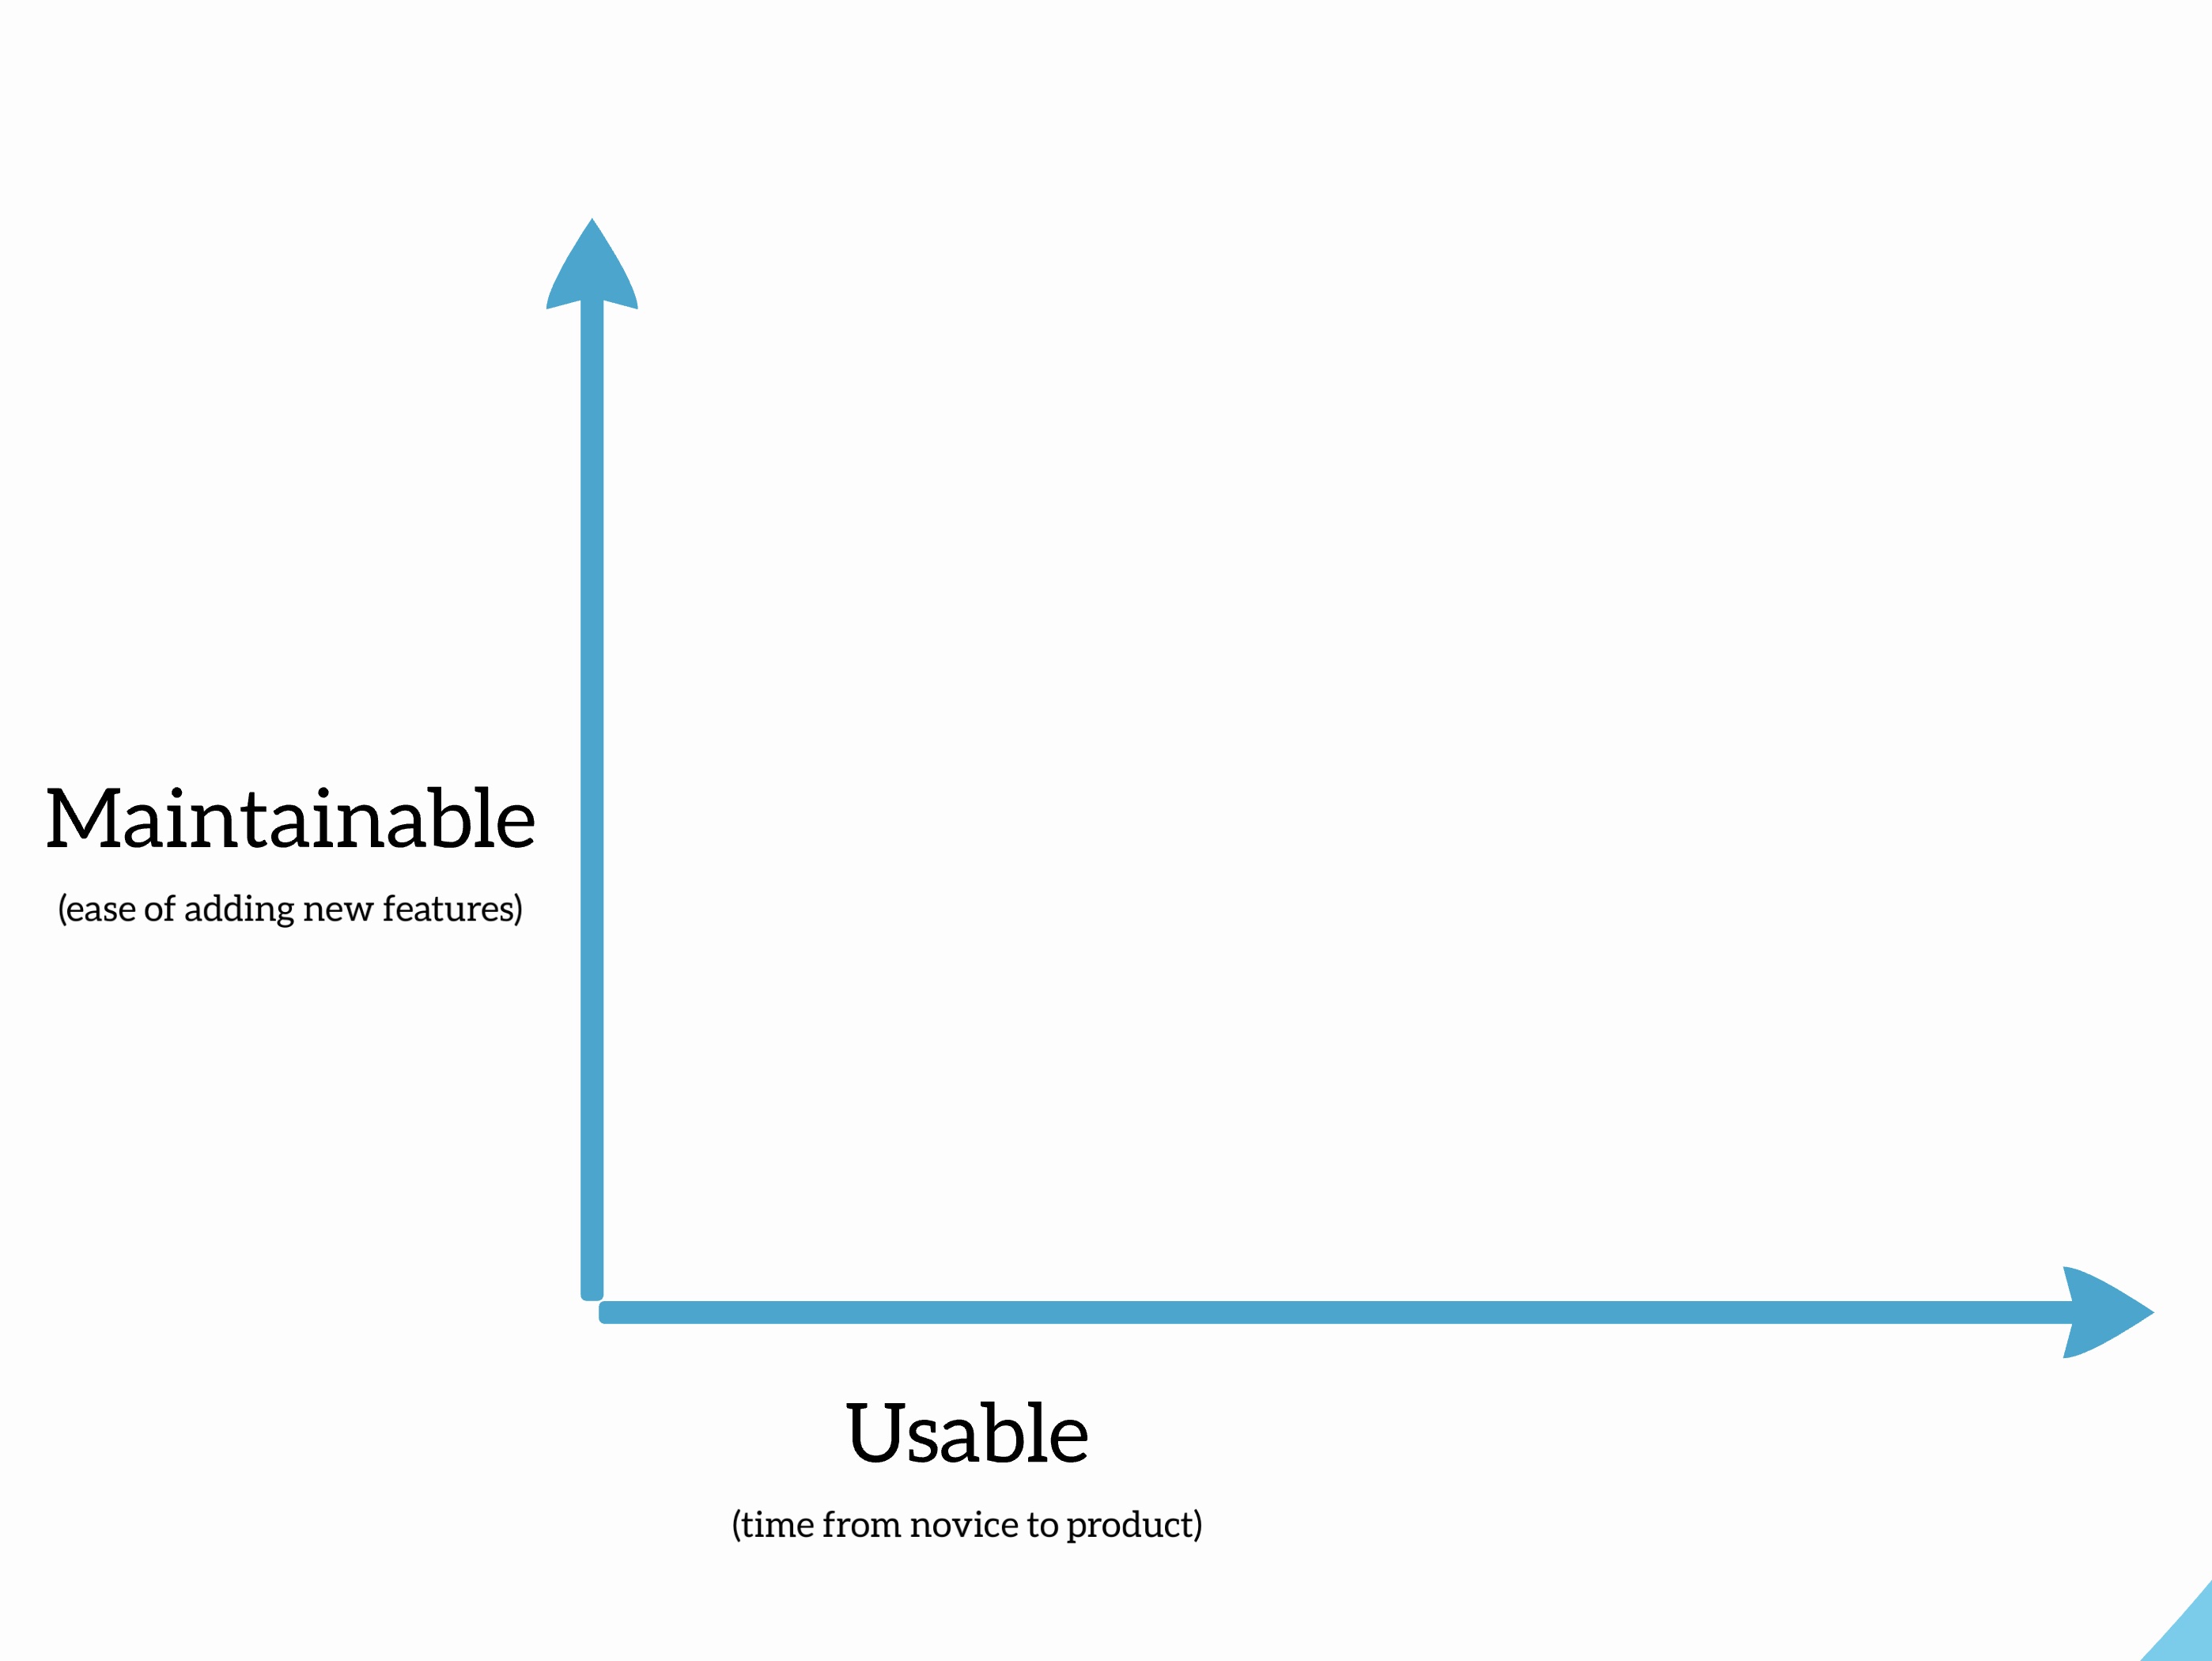 An empty graph with two axes: On the y-axis, we see "Maintainable: Ease of adding new features". On the x-axis, we see "Usable: Time from novice to product"